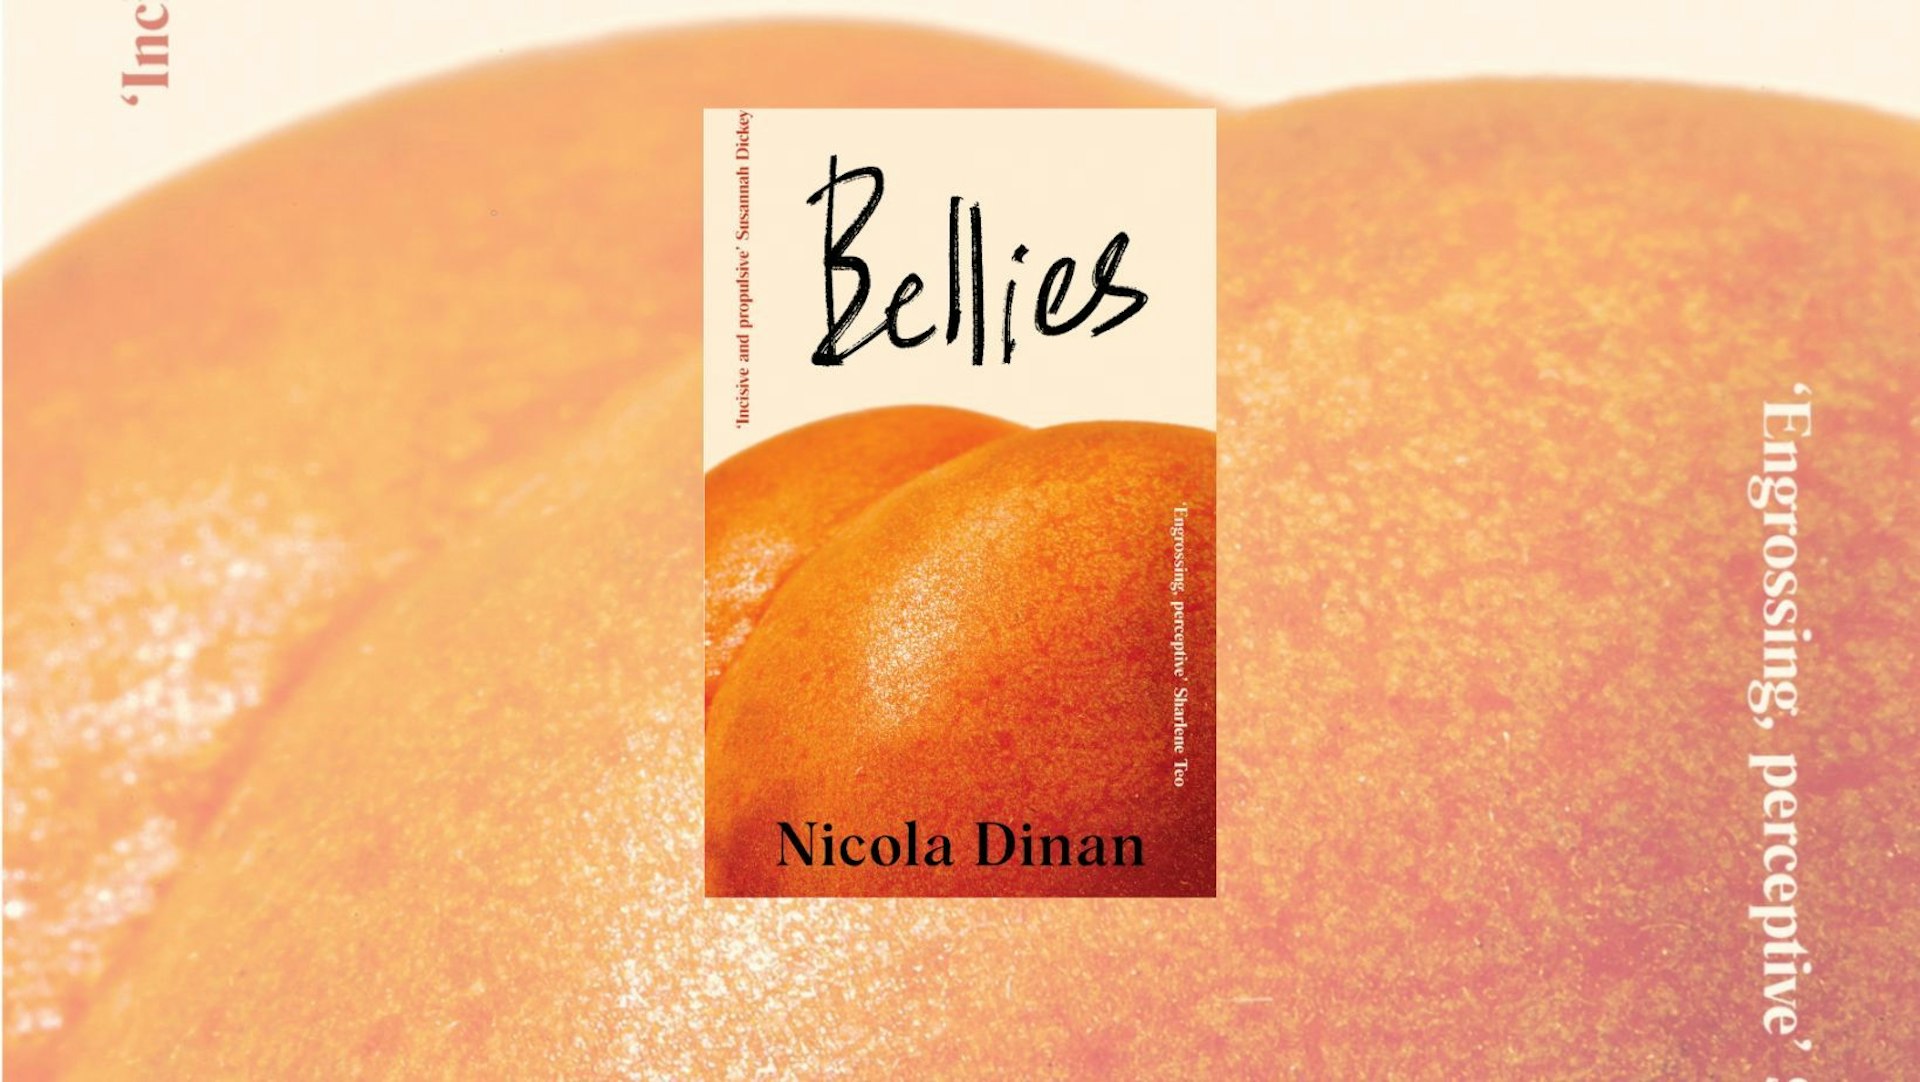 ‘You can literally just do it’: Nicola Dinan on intimacy, representation and Bellies